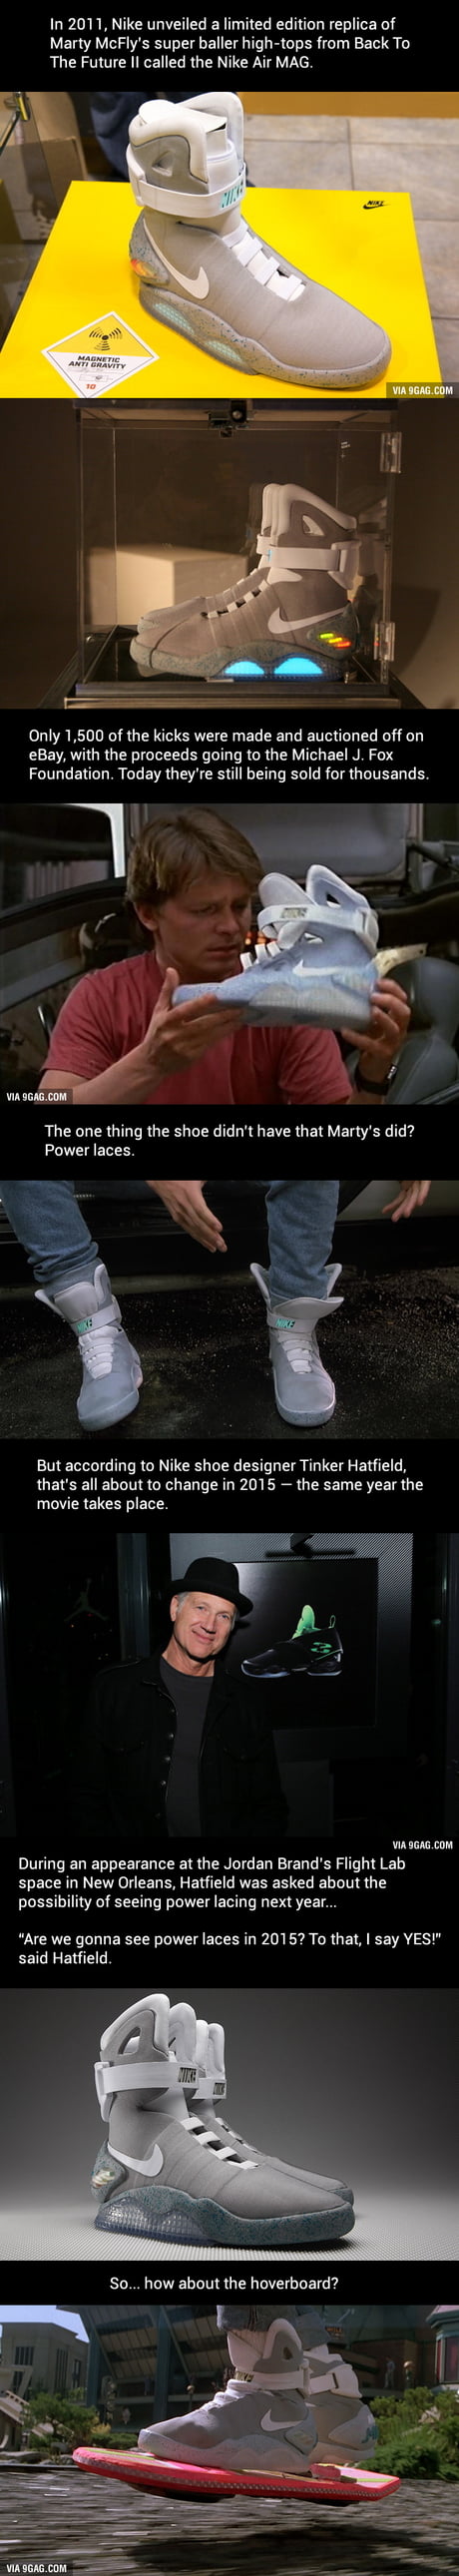 back to the future power laces